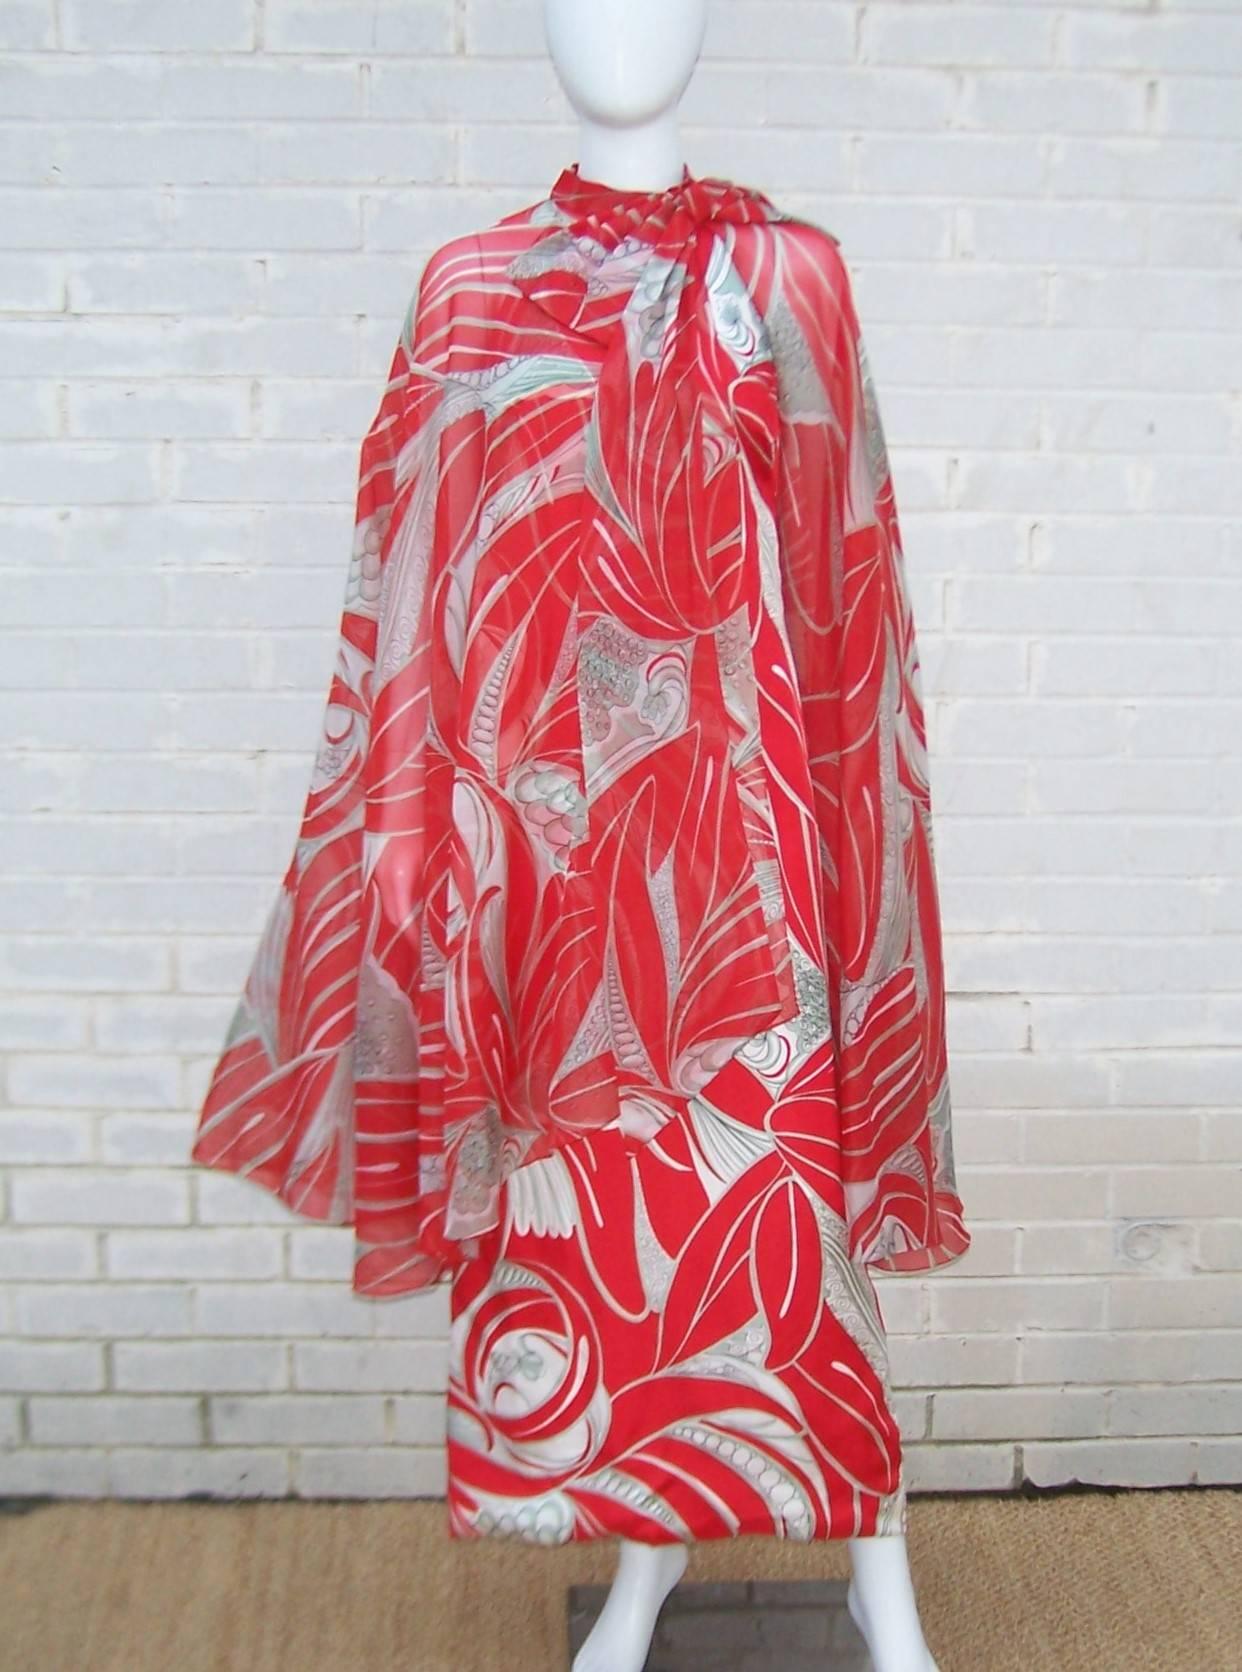 This 1970's dress by Natalie Collett is a fun and fabulous combination of a vibrant tropical print and a dramatic asymmetrical chiffon cape.  The simple columnar halter dress is designed with a not-so-simple graphic fabric in red, white, gray and